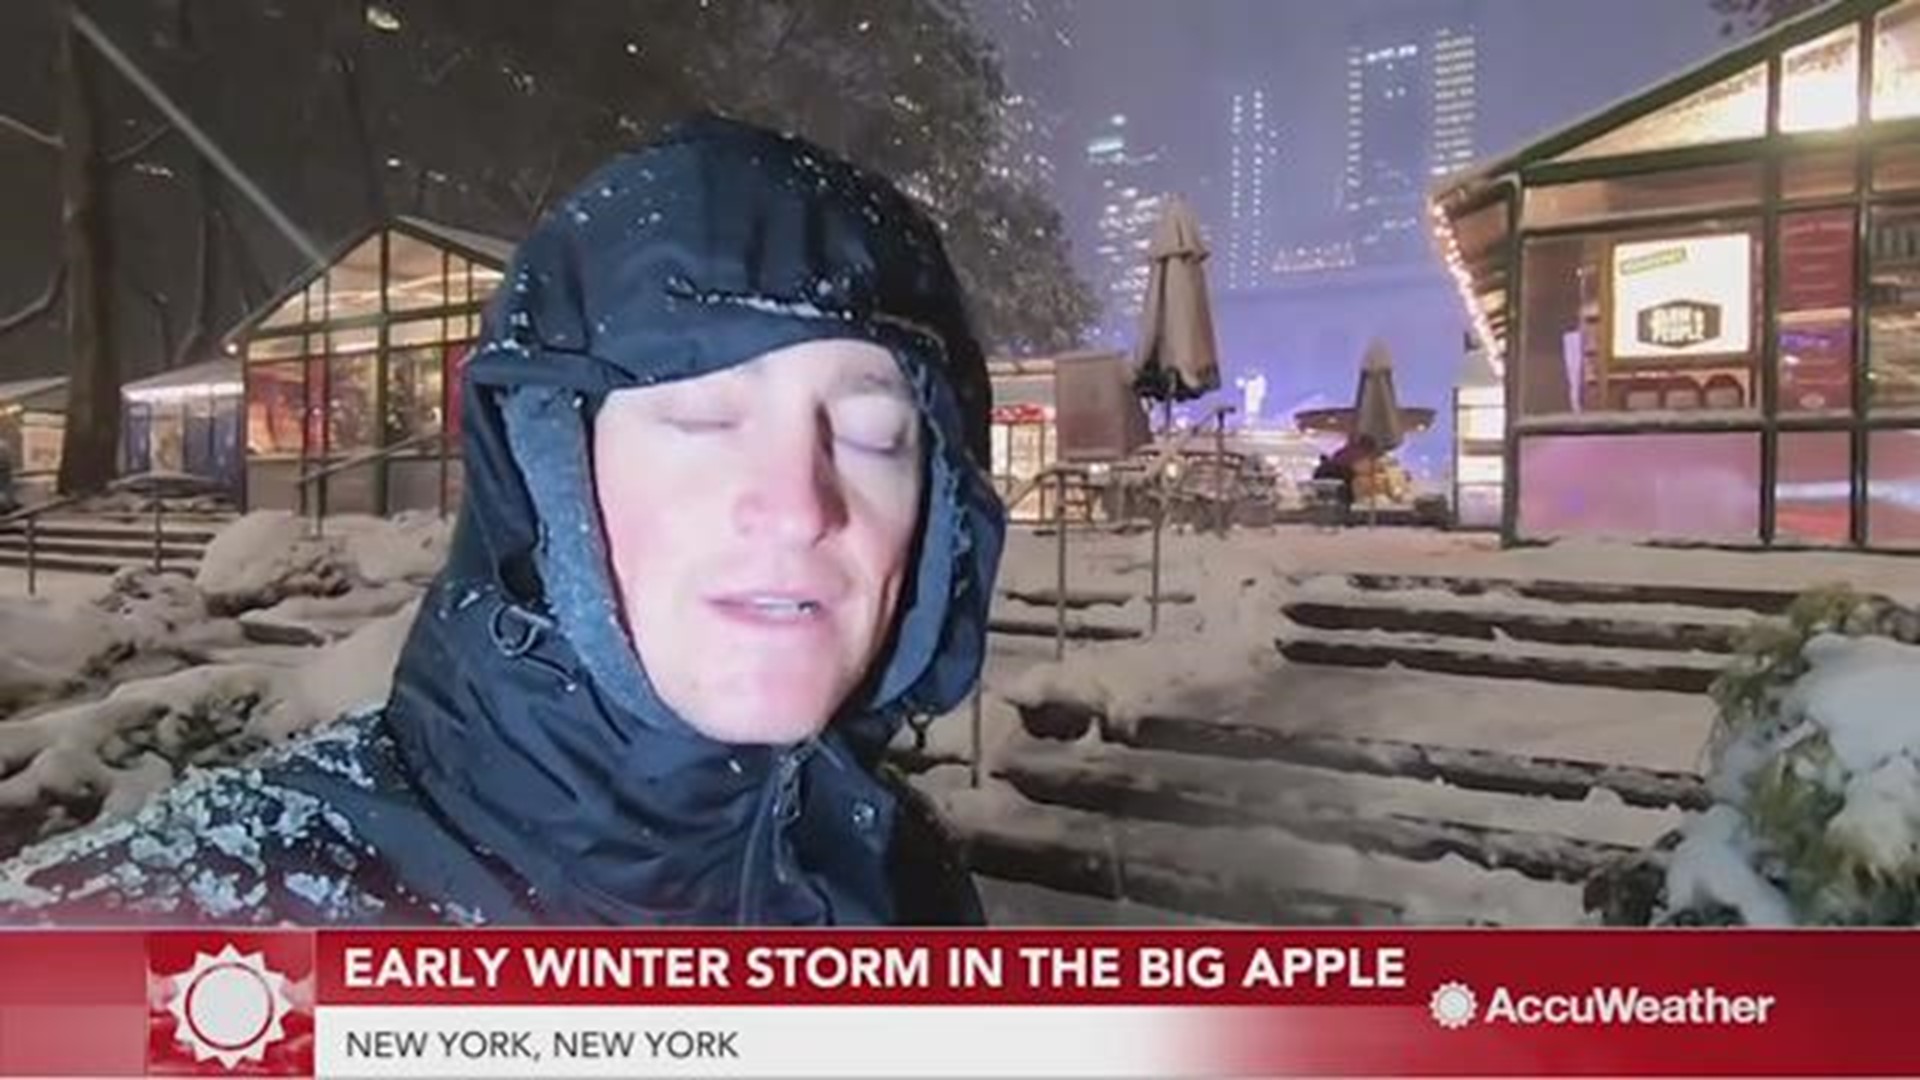 An early winter storm has caused messy road conditions in New York City and closed down the winter village in Bryant Park.  But it didn't stop visitors from enjoying their stay in the city.